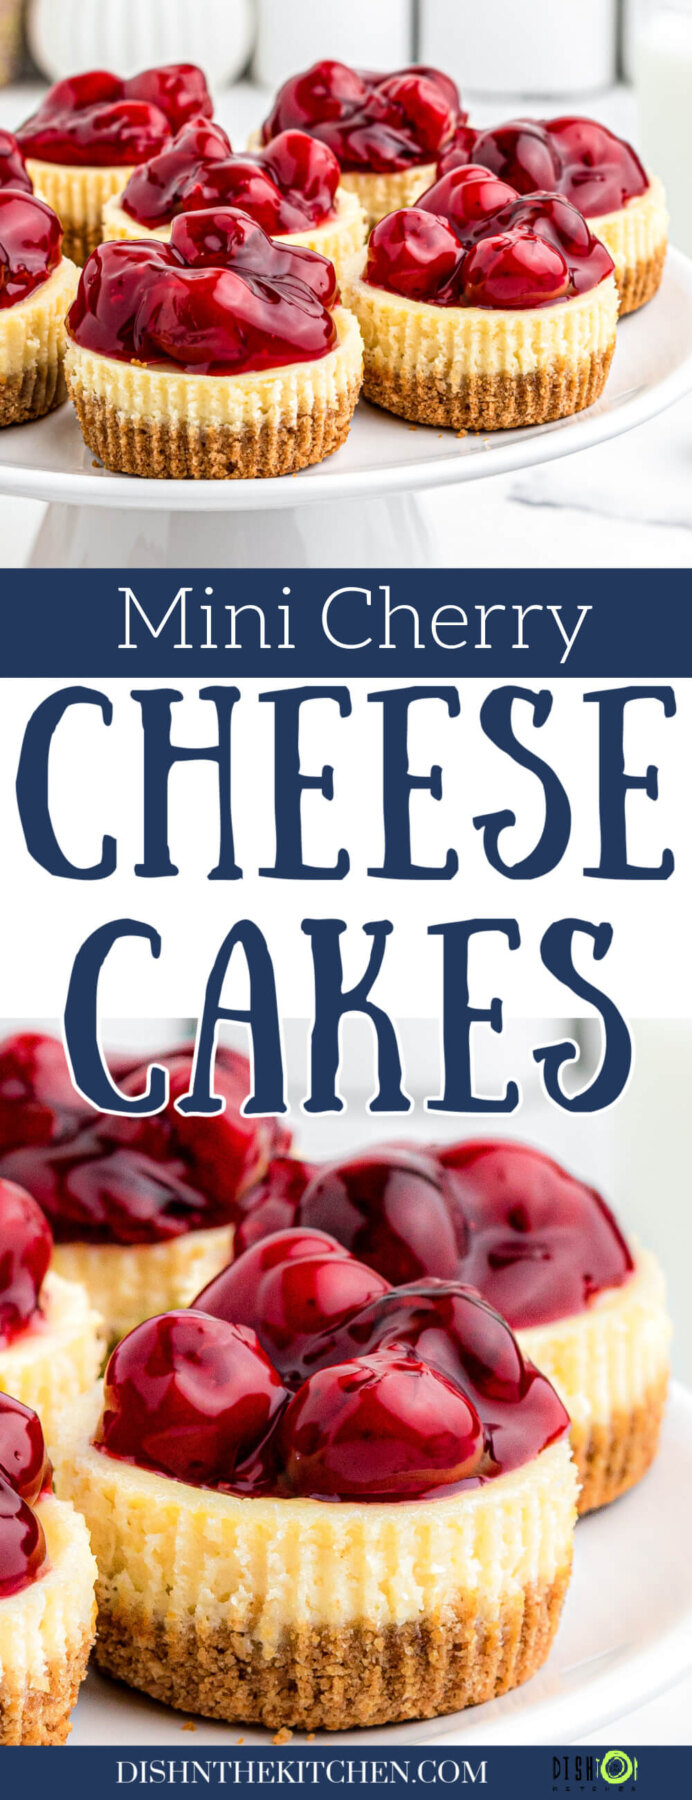 Pinterest image featuring bite sized mini cherry cheesecakes up close and on a white platter.